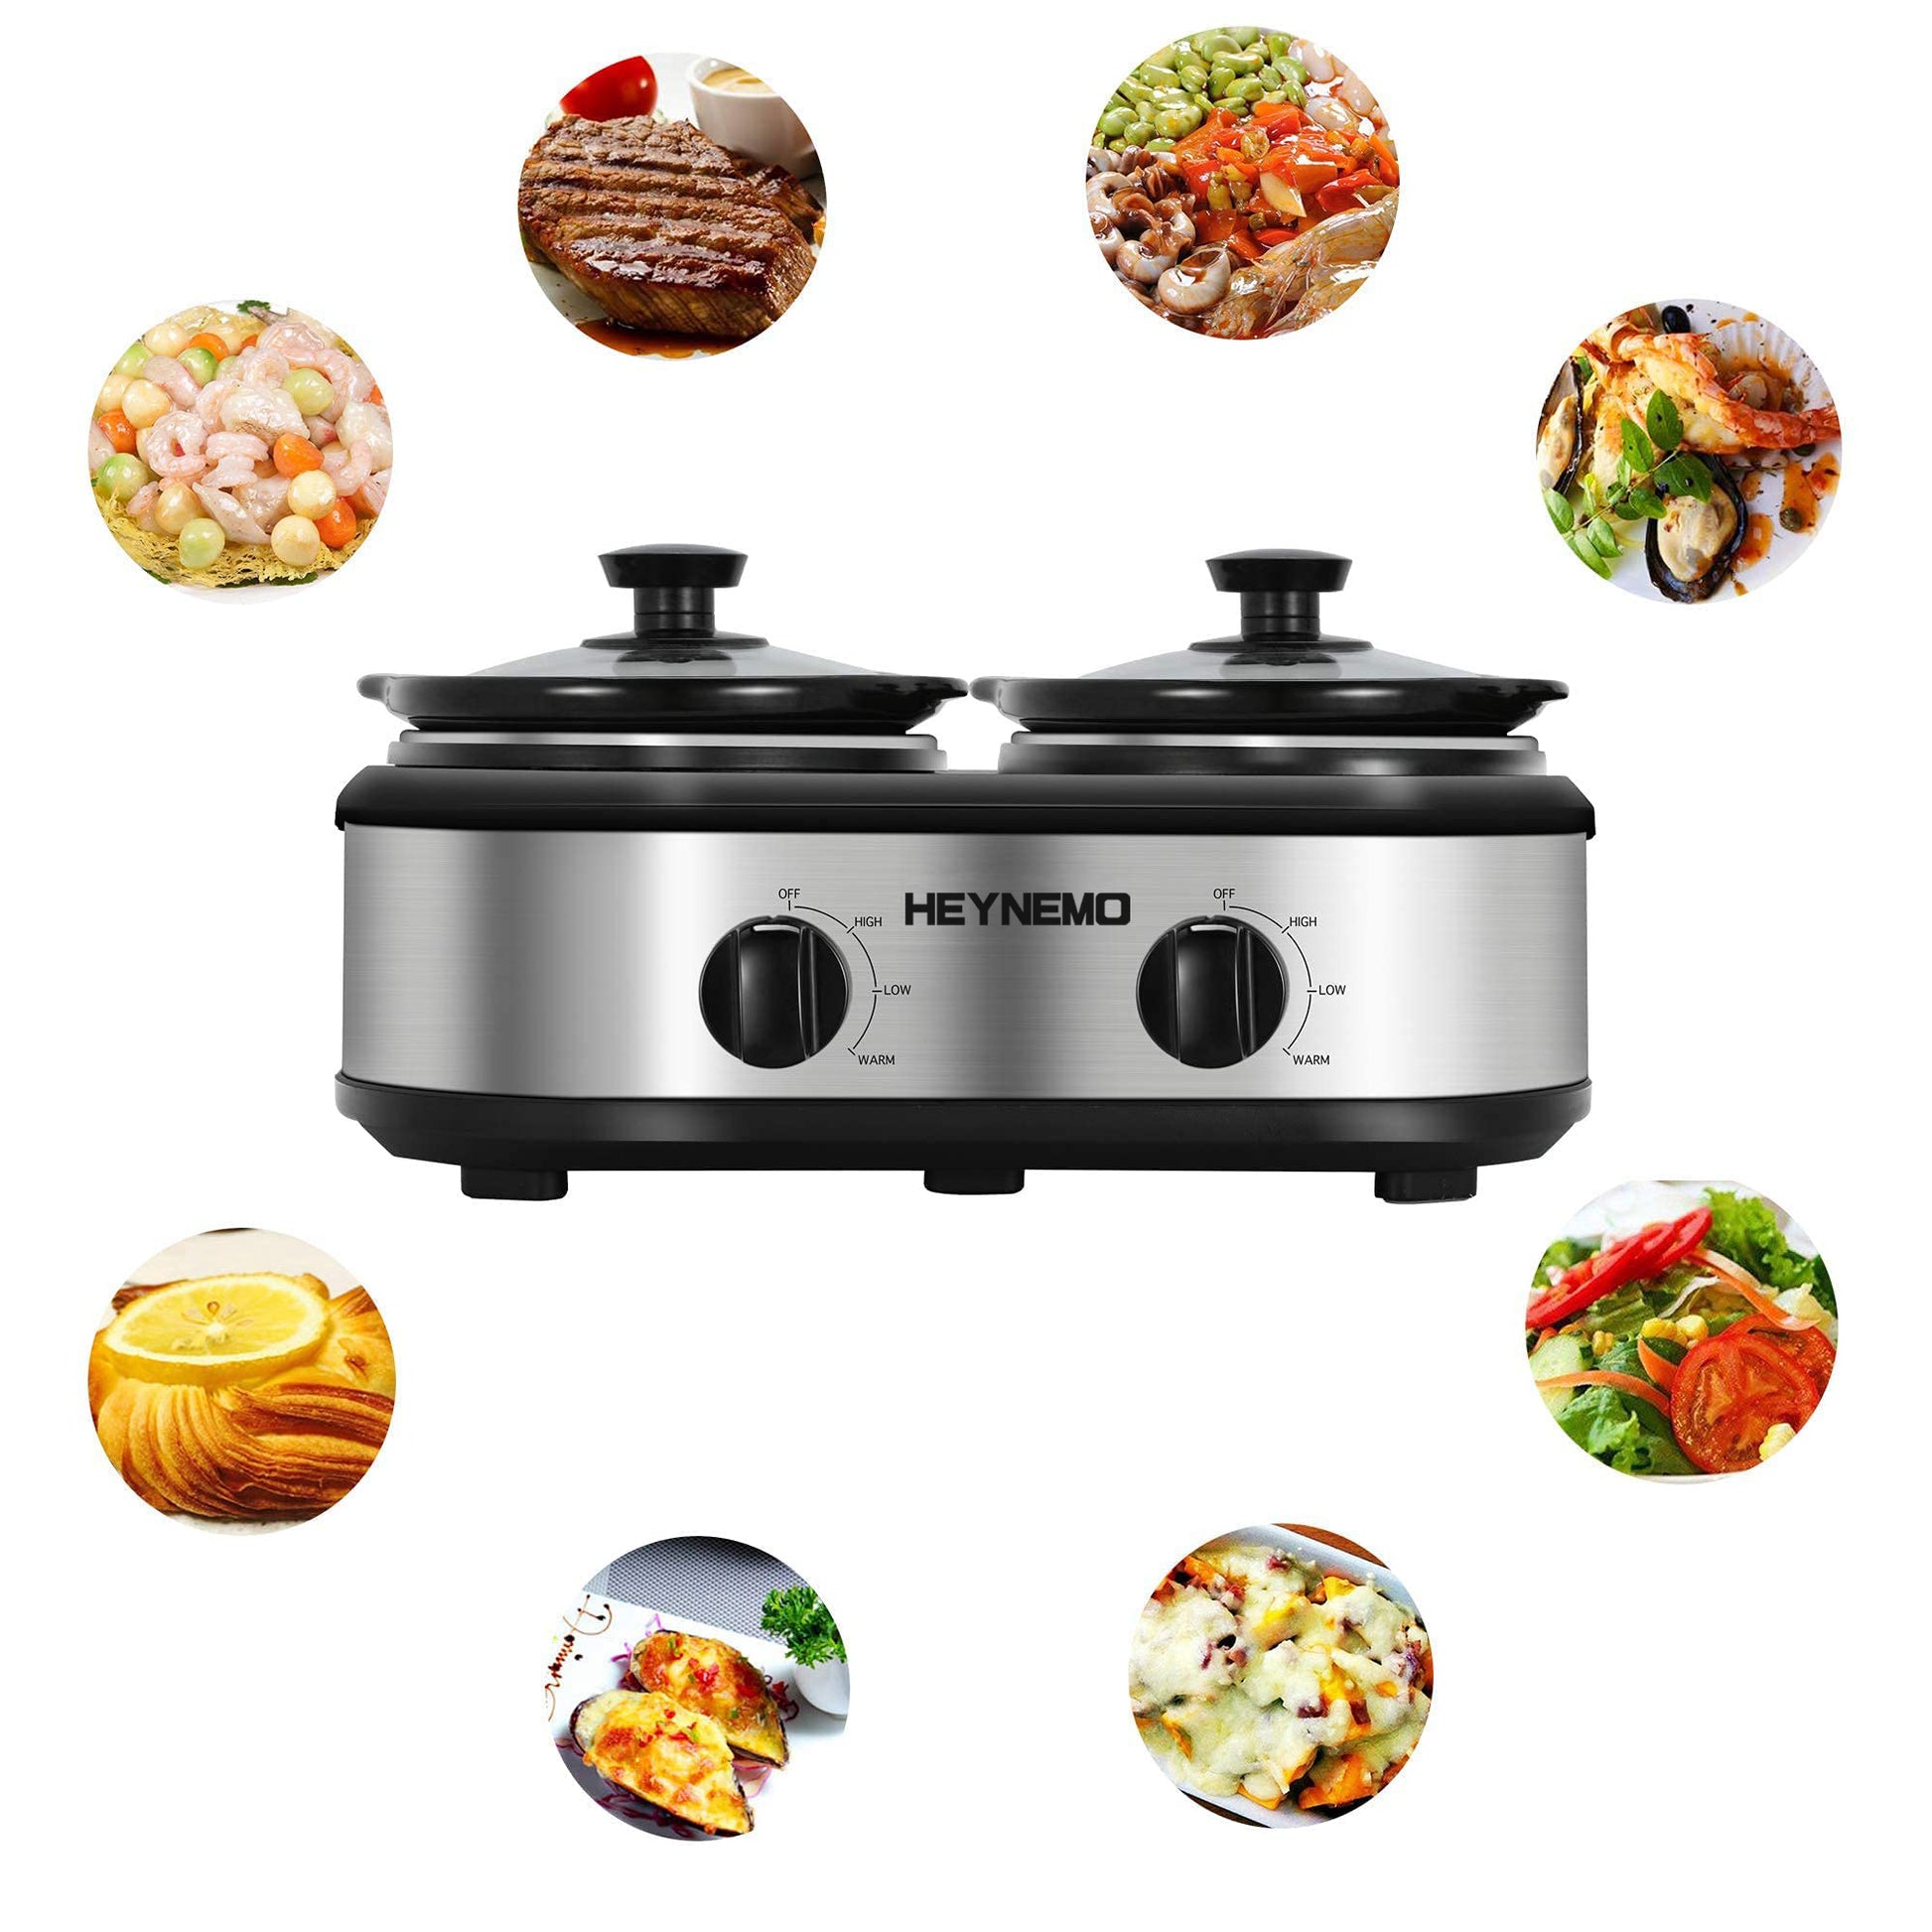 Small Double Slow Cooker, 2 Pot 1.25 Quart Oval Crock Food Warmer Buffet  Server, Stainless Steel 